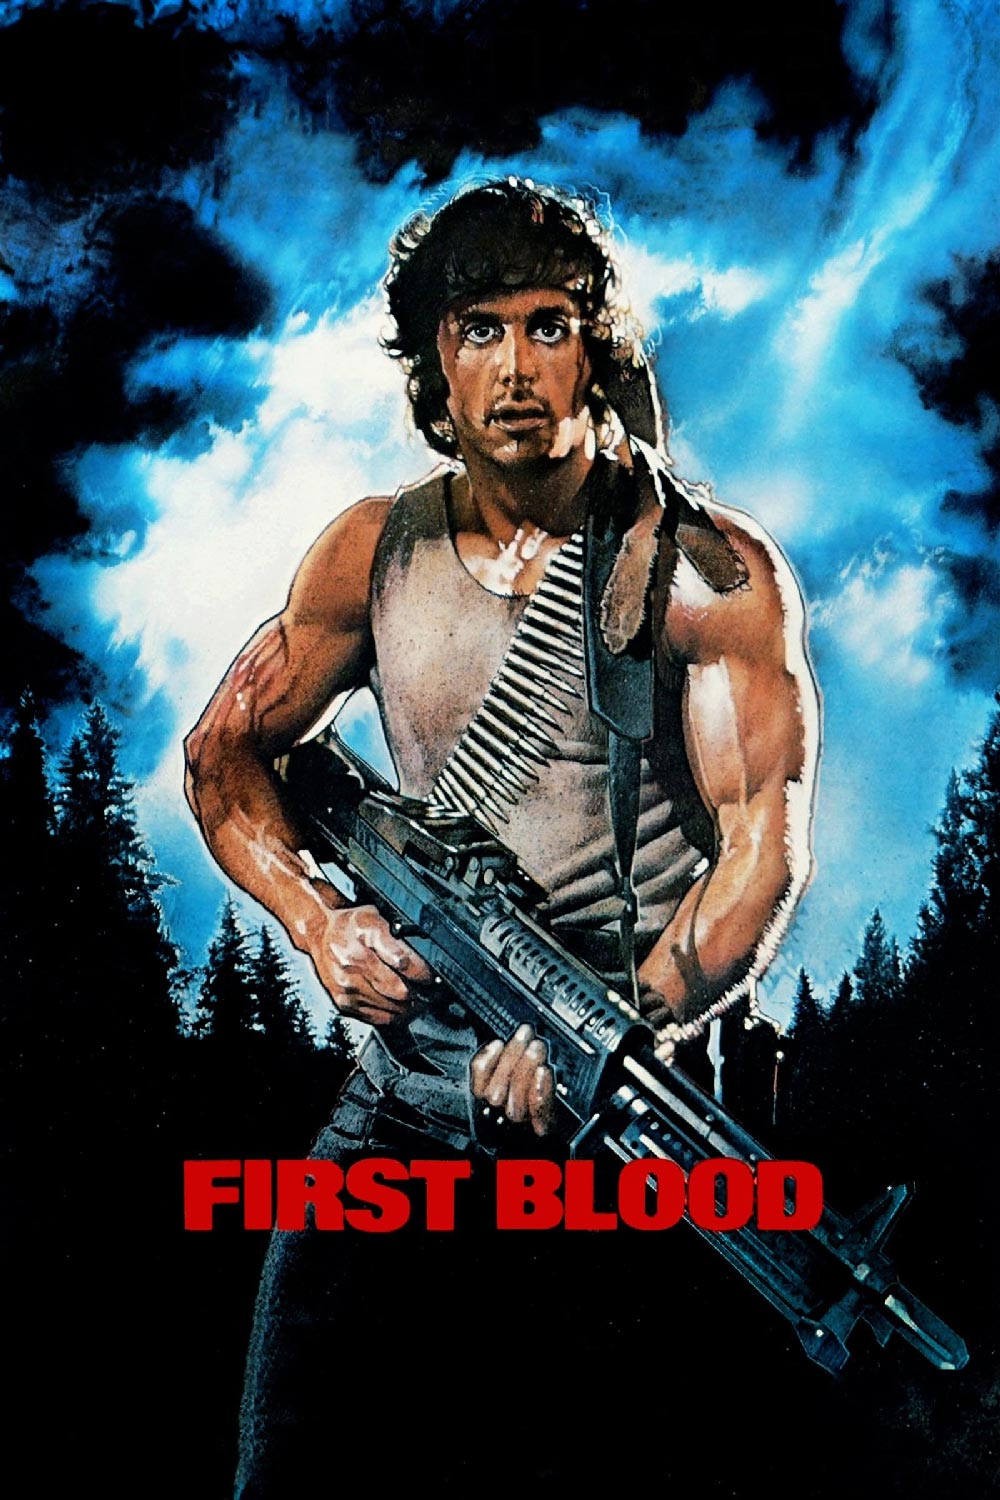 First Blood (1982) Poster